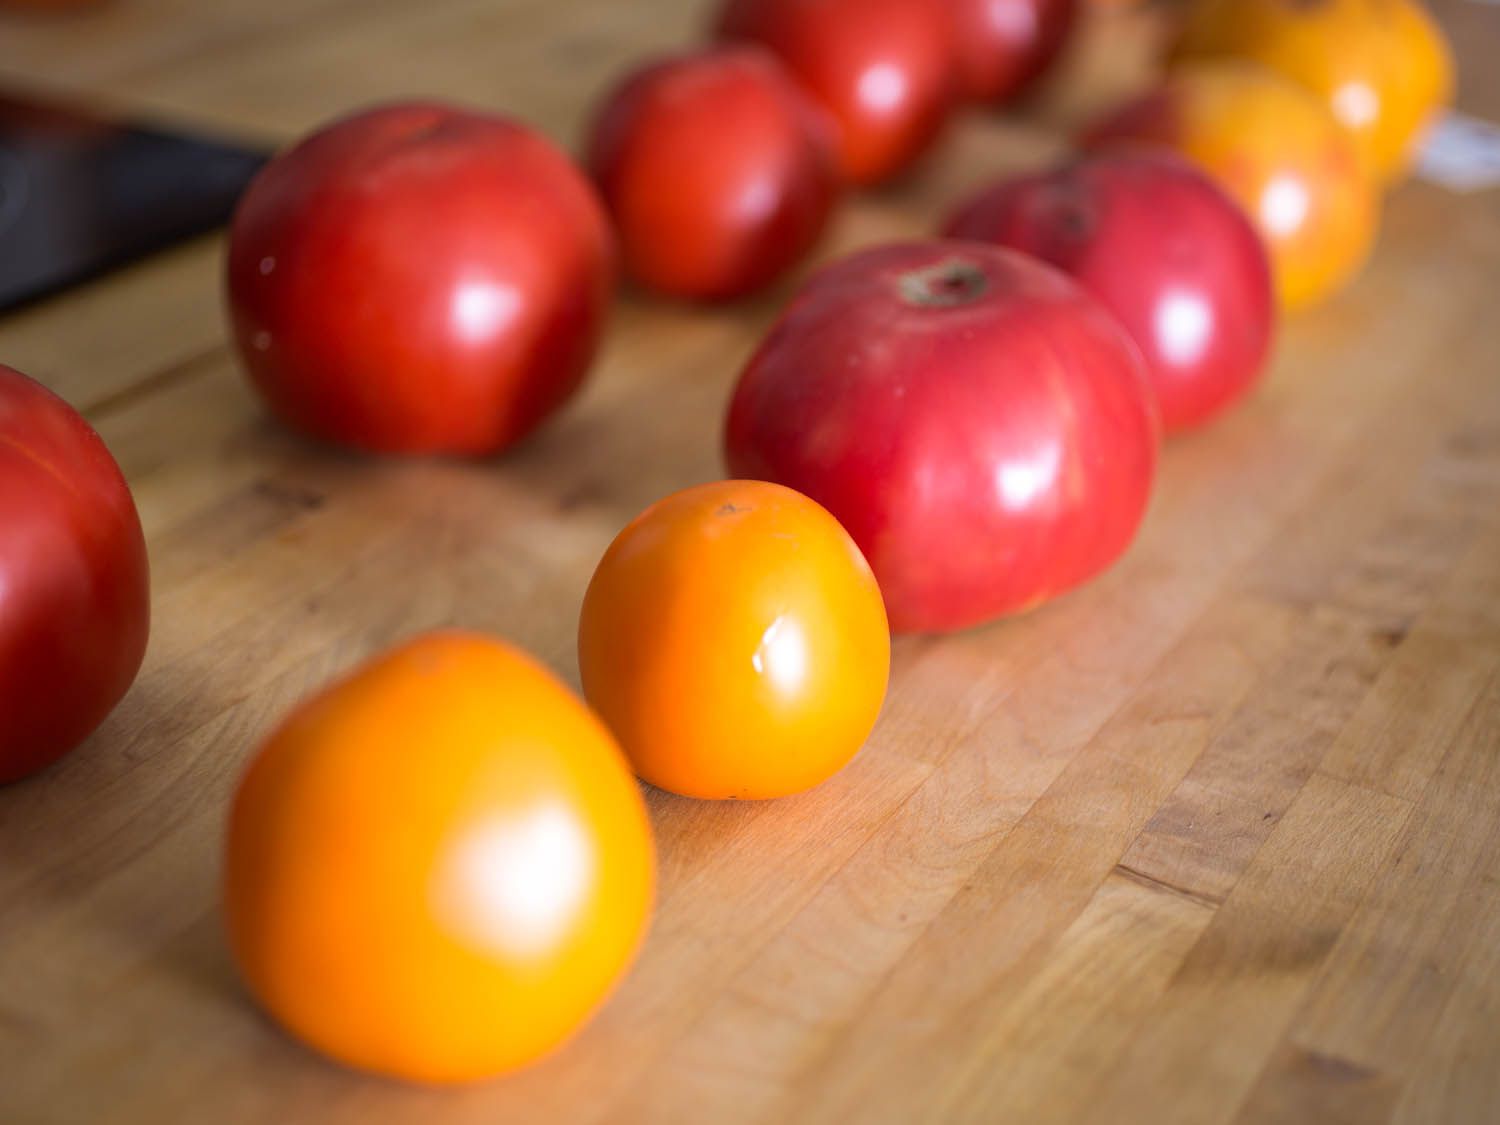 Various tomatoes of different sizes, shapes, and colors all lined up on a wooden cutting board.